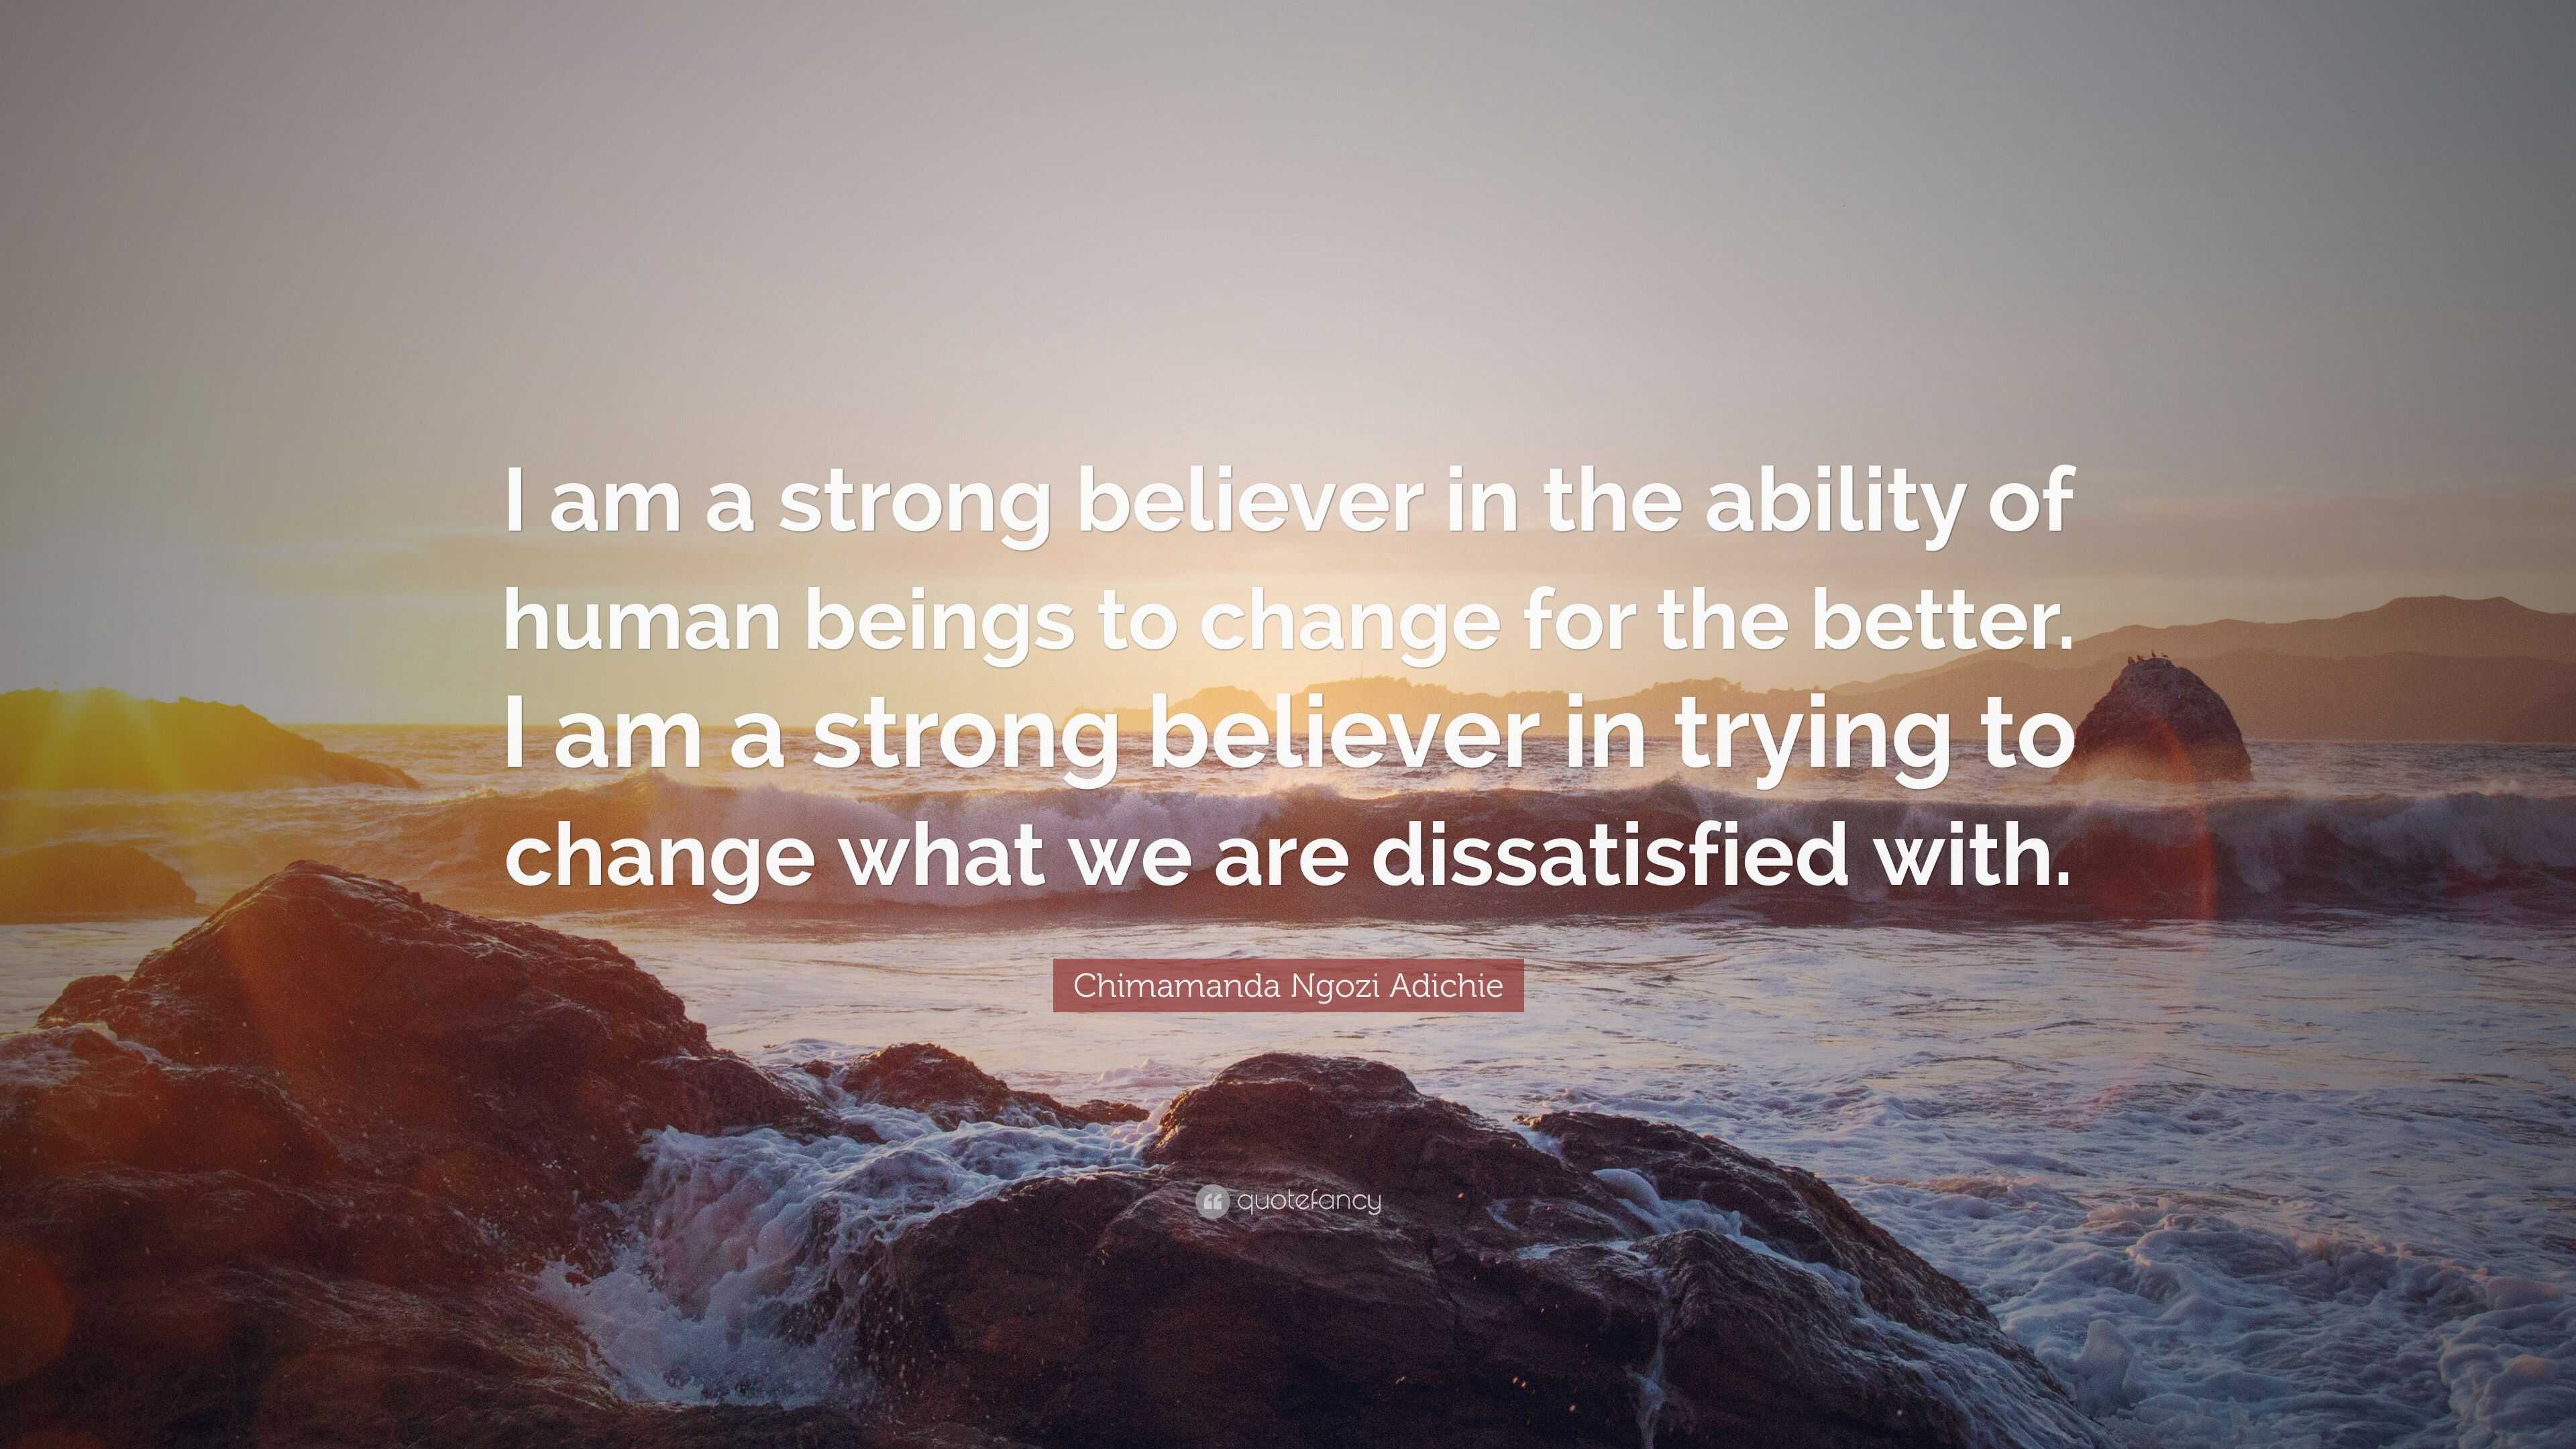 Chimamanda Ngozi Adichie Quote: “I am a strong believer in the ability ...